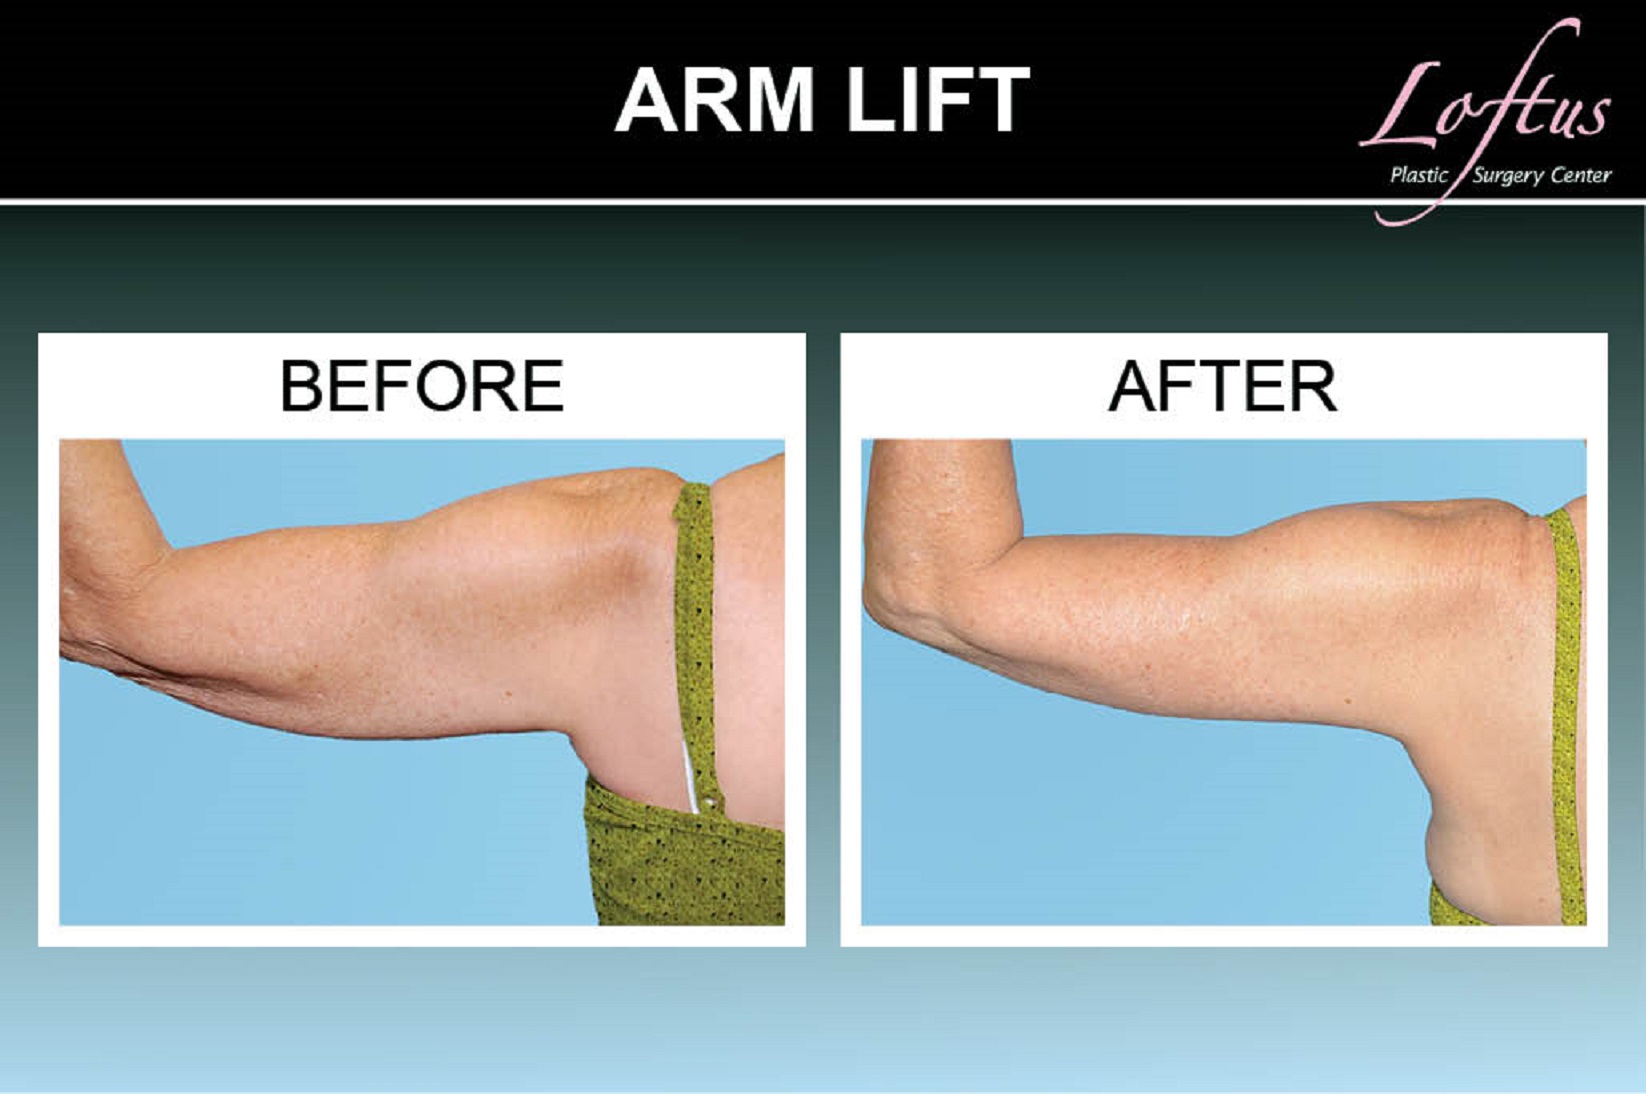 Arm Scars Before & After Photos - Arm Scars